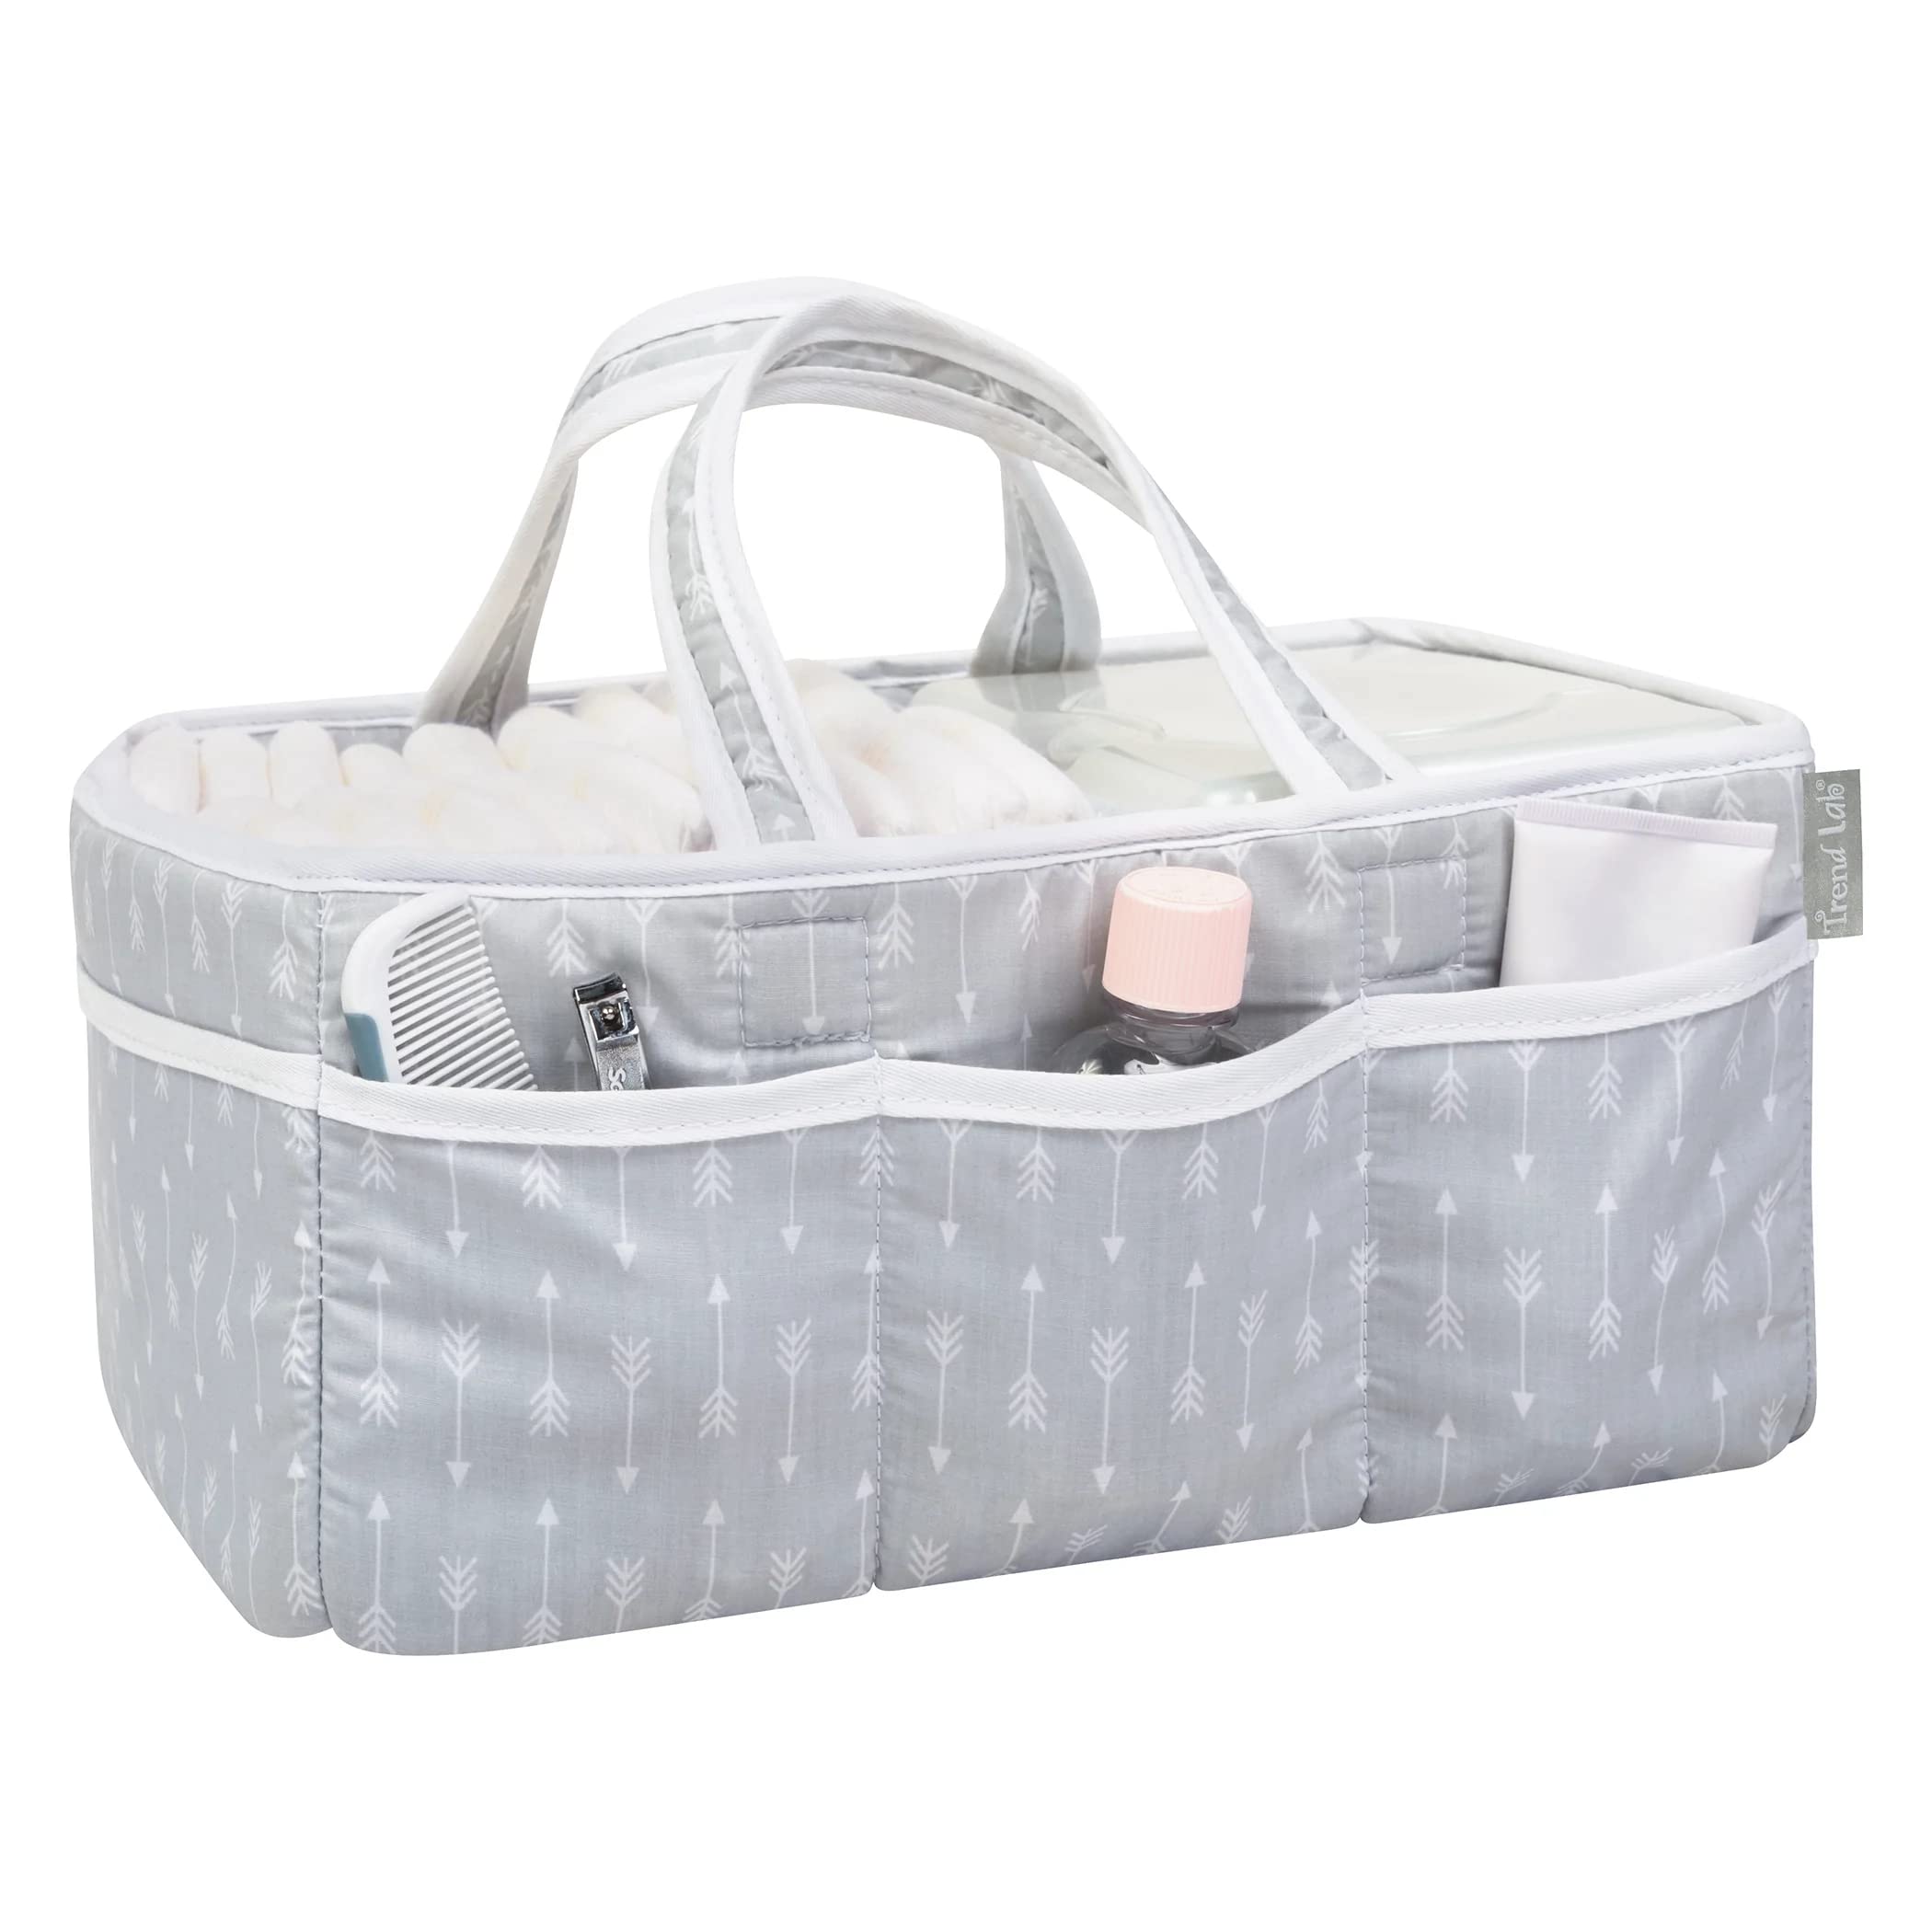 Trend Lab Gray Arrows Storage Caddy Diaper Organizer for Baby Nursery and Changing Table Accessories, 12 in x 6 in x 8 in